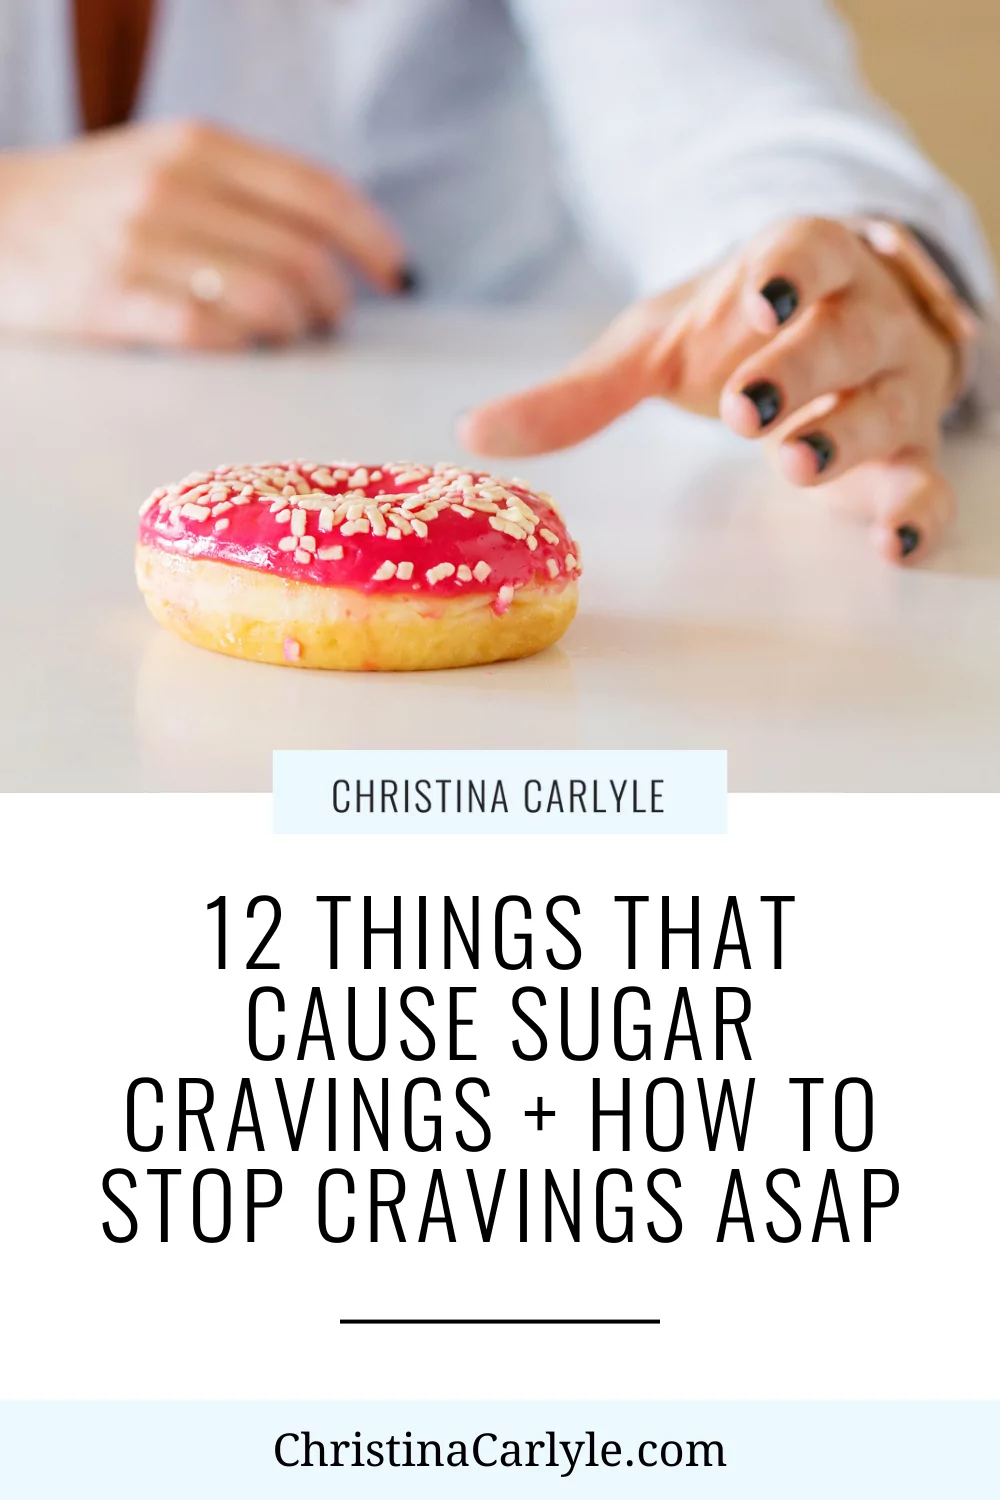 a picture of a woman's hand reaching for a donut and text that says 12 things that cause sugar cravings